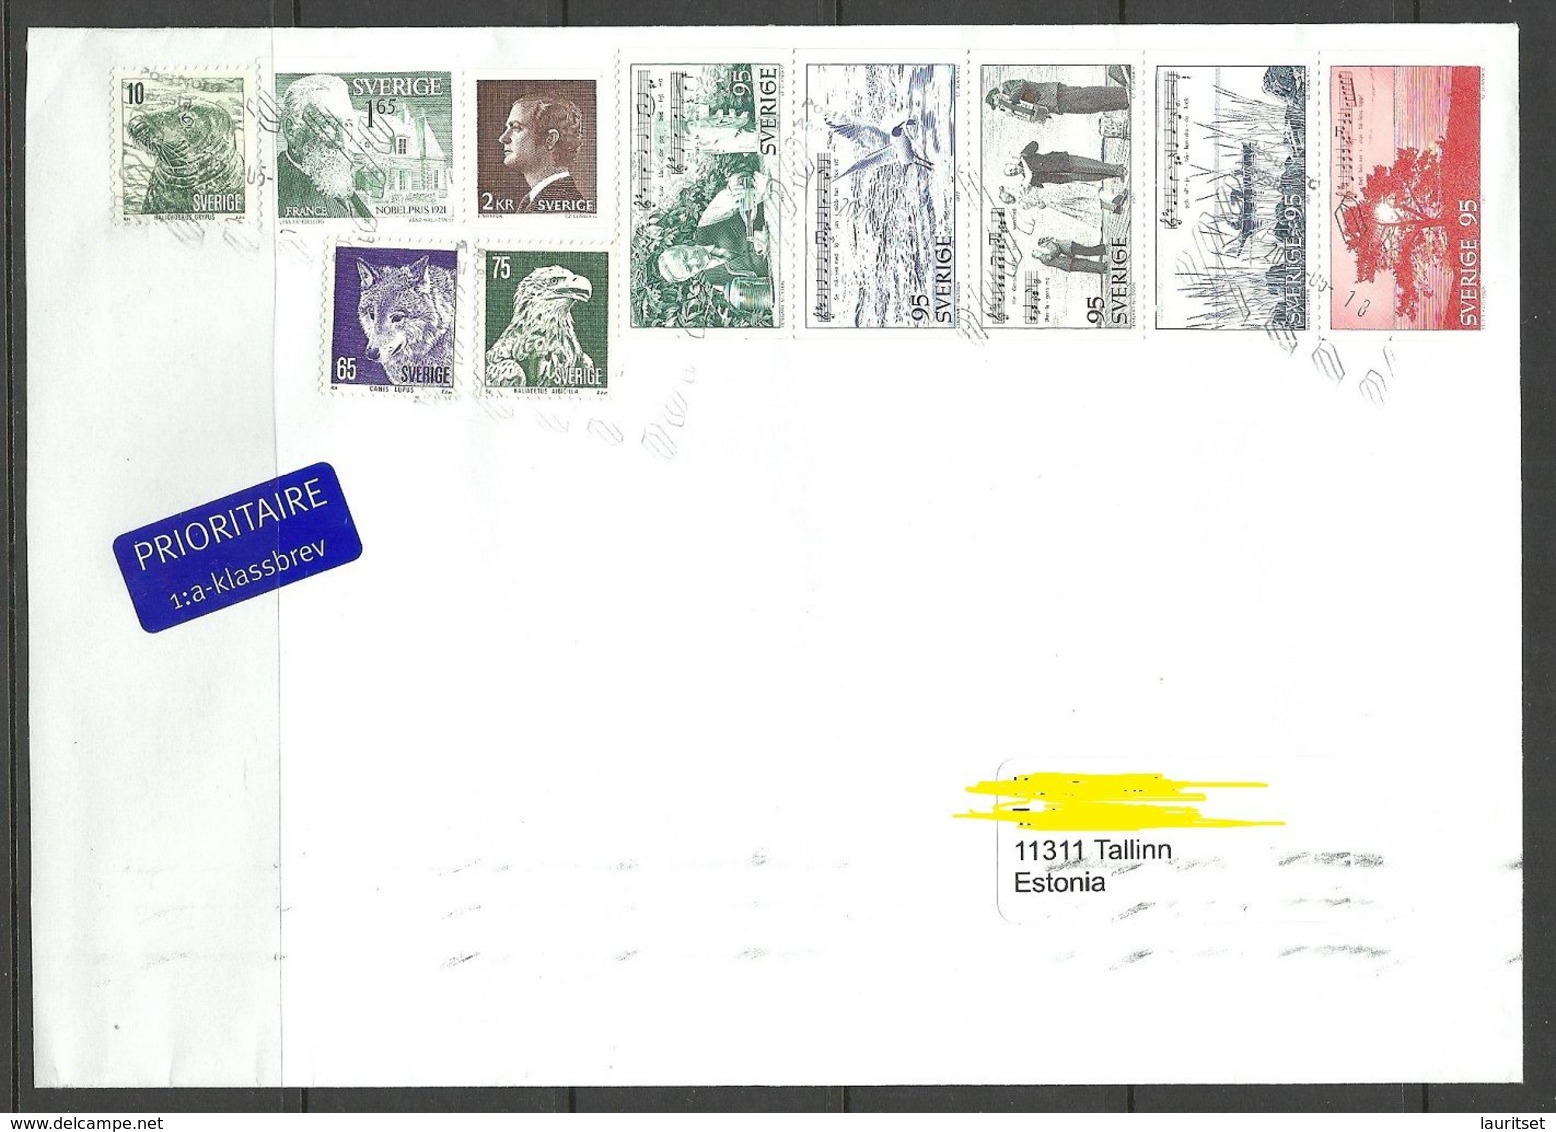 SCHWEDEN Sweden 2020 Air Mail Cover To Estonia Michel 983 - 987 Tourism Etc Animals Wolf King Etc - Covers & Documents